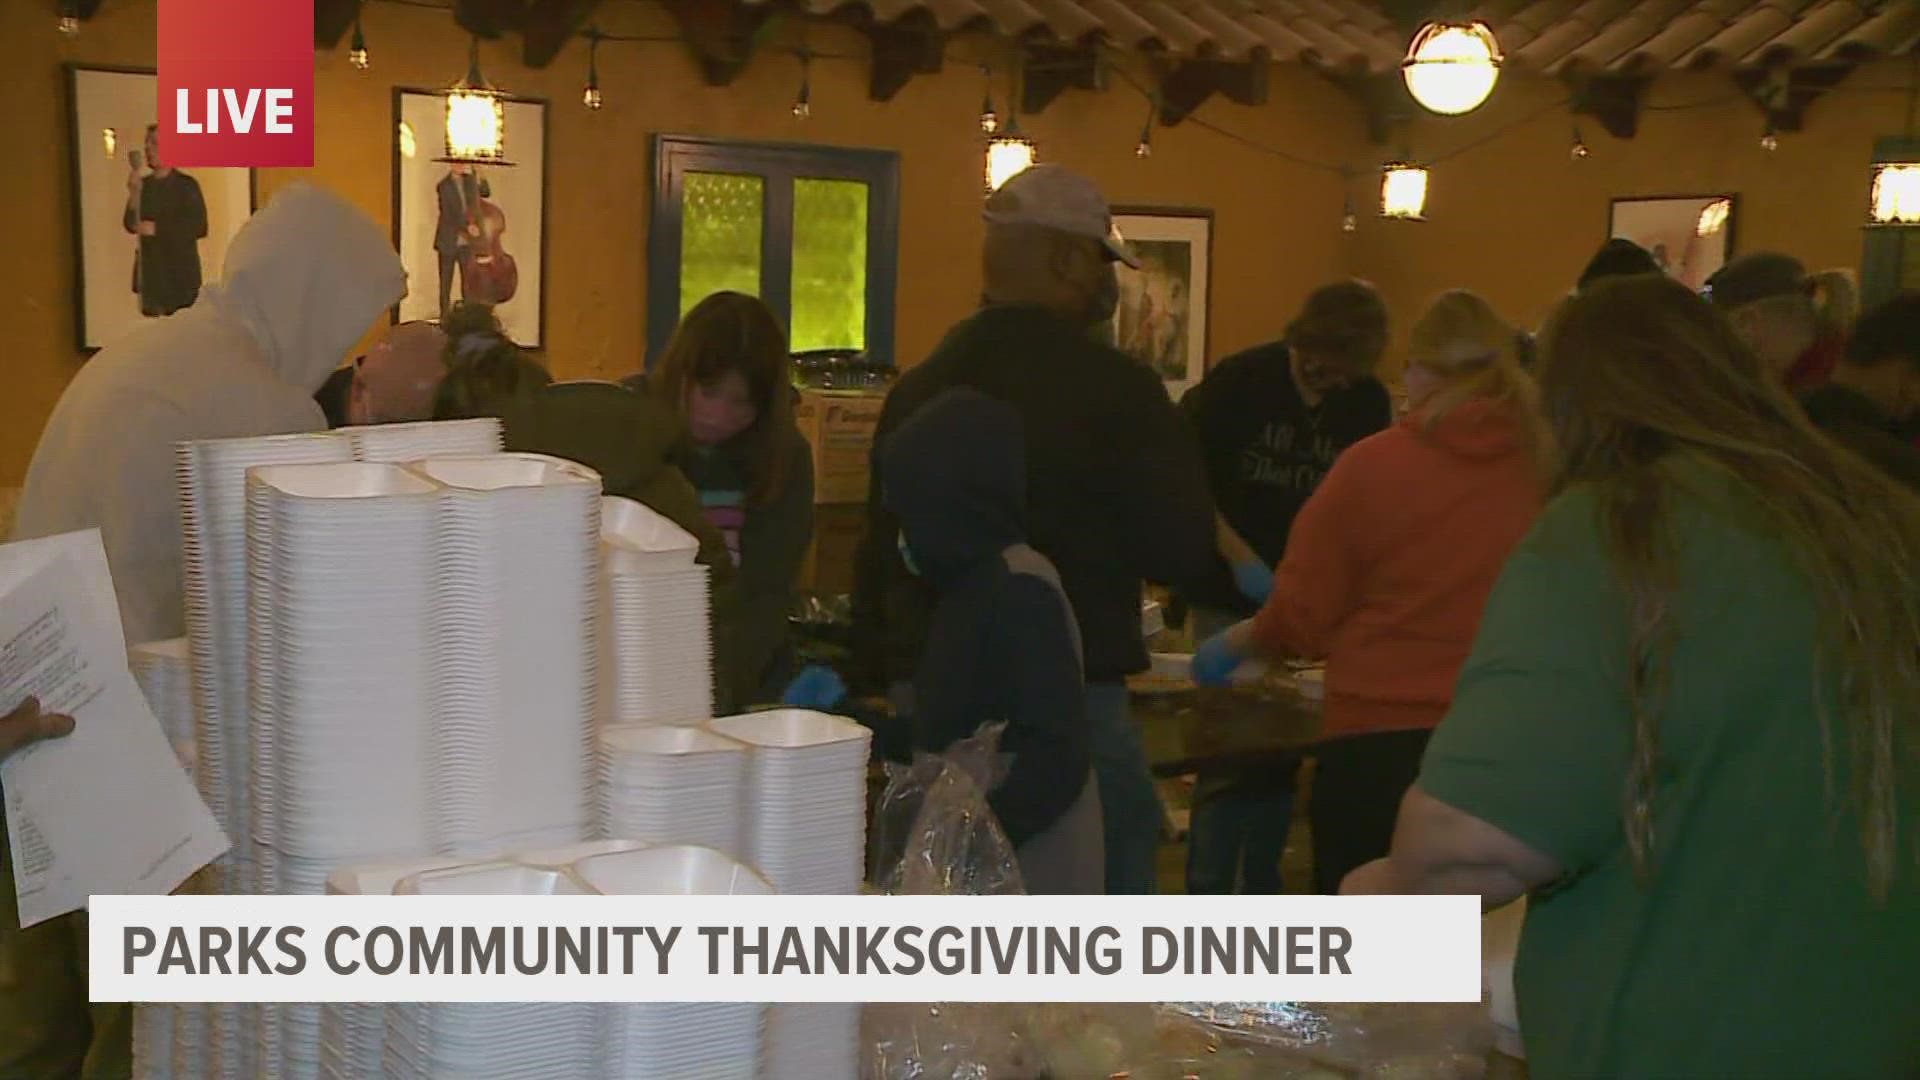 Volunteers were prepping food to serve to about 2,600 people for the Parks Community Thanksgiving Dinner.